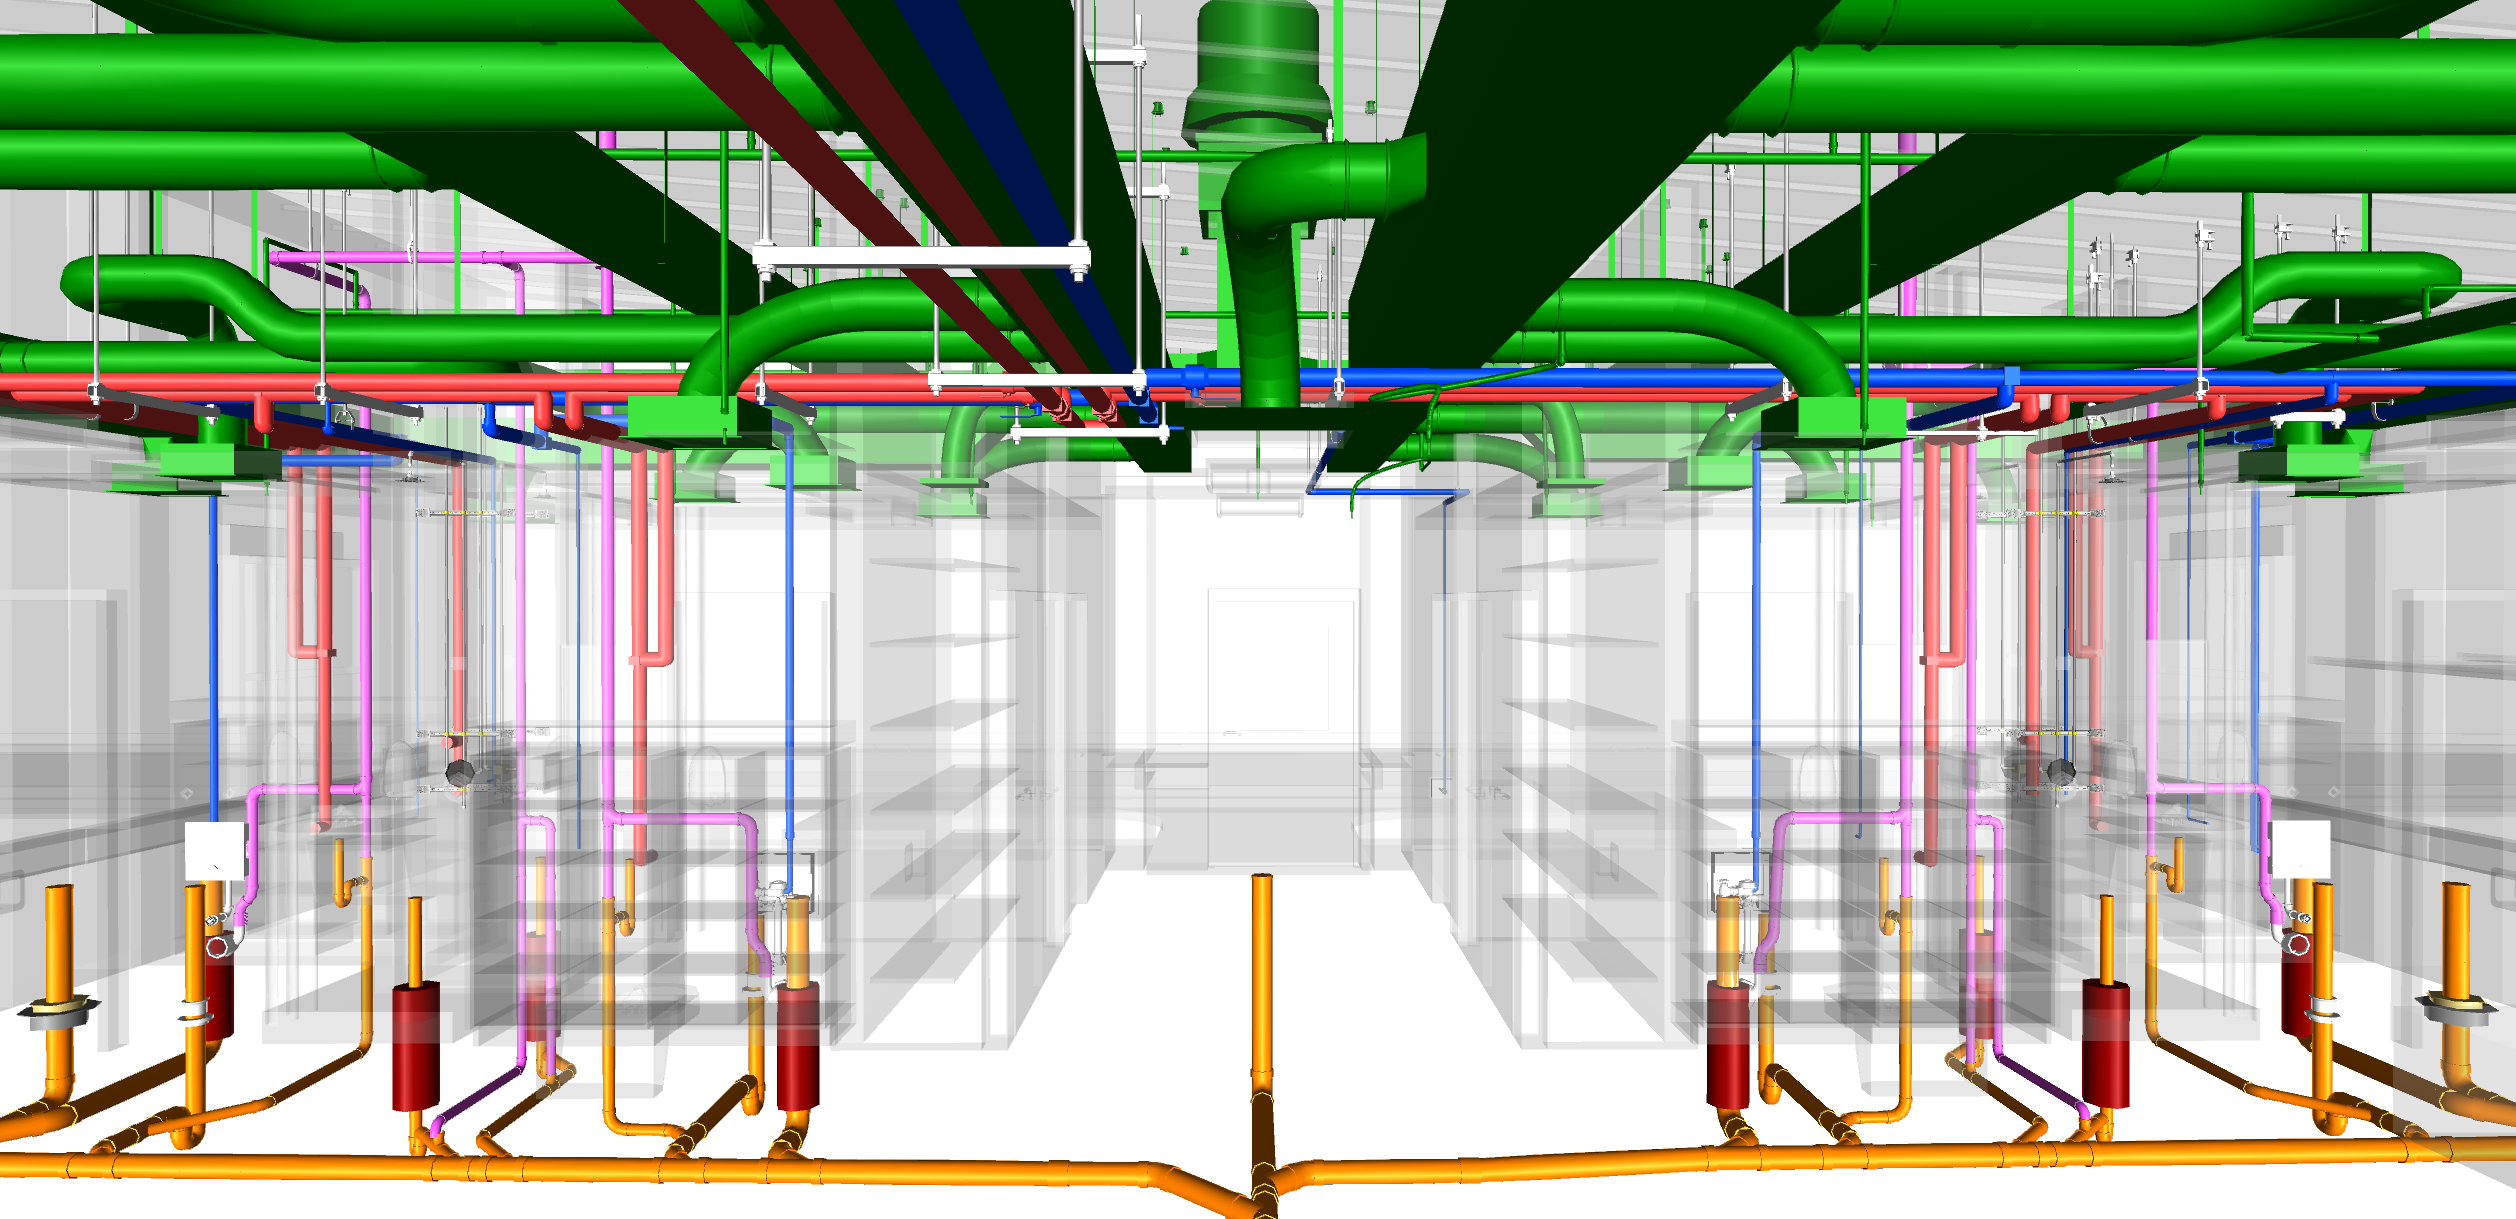 BIM model of piping system in a building